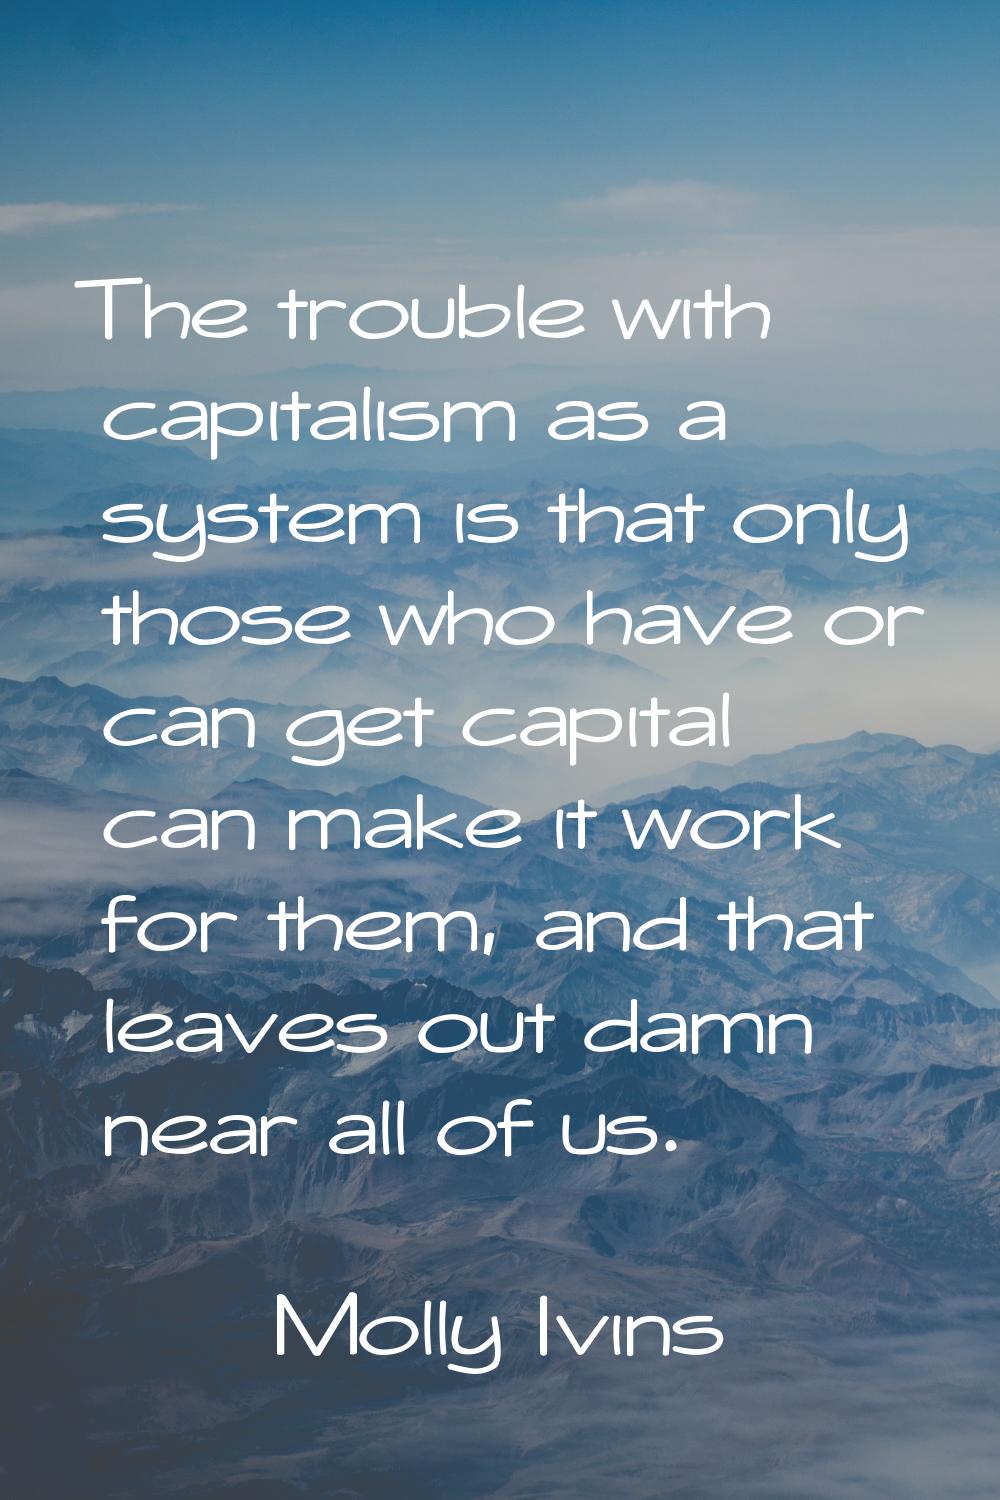 The trouble with capitalism as a system is that only those who have or can get capital can make it 